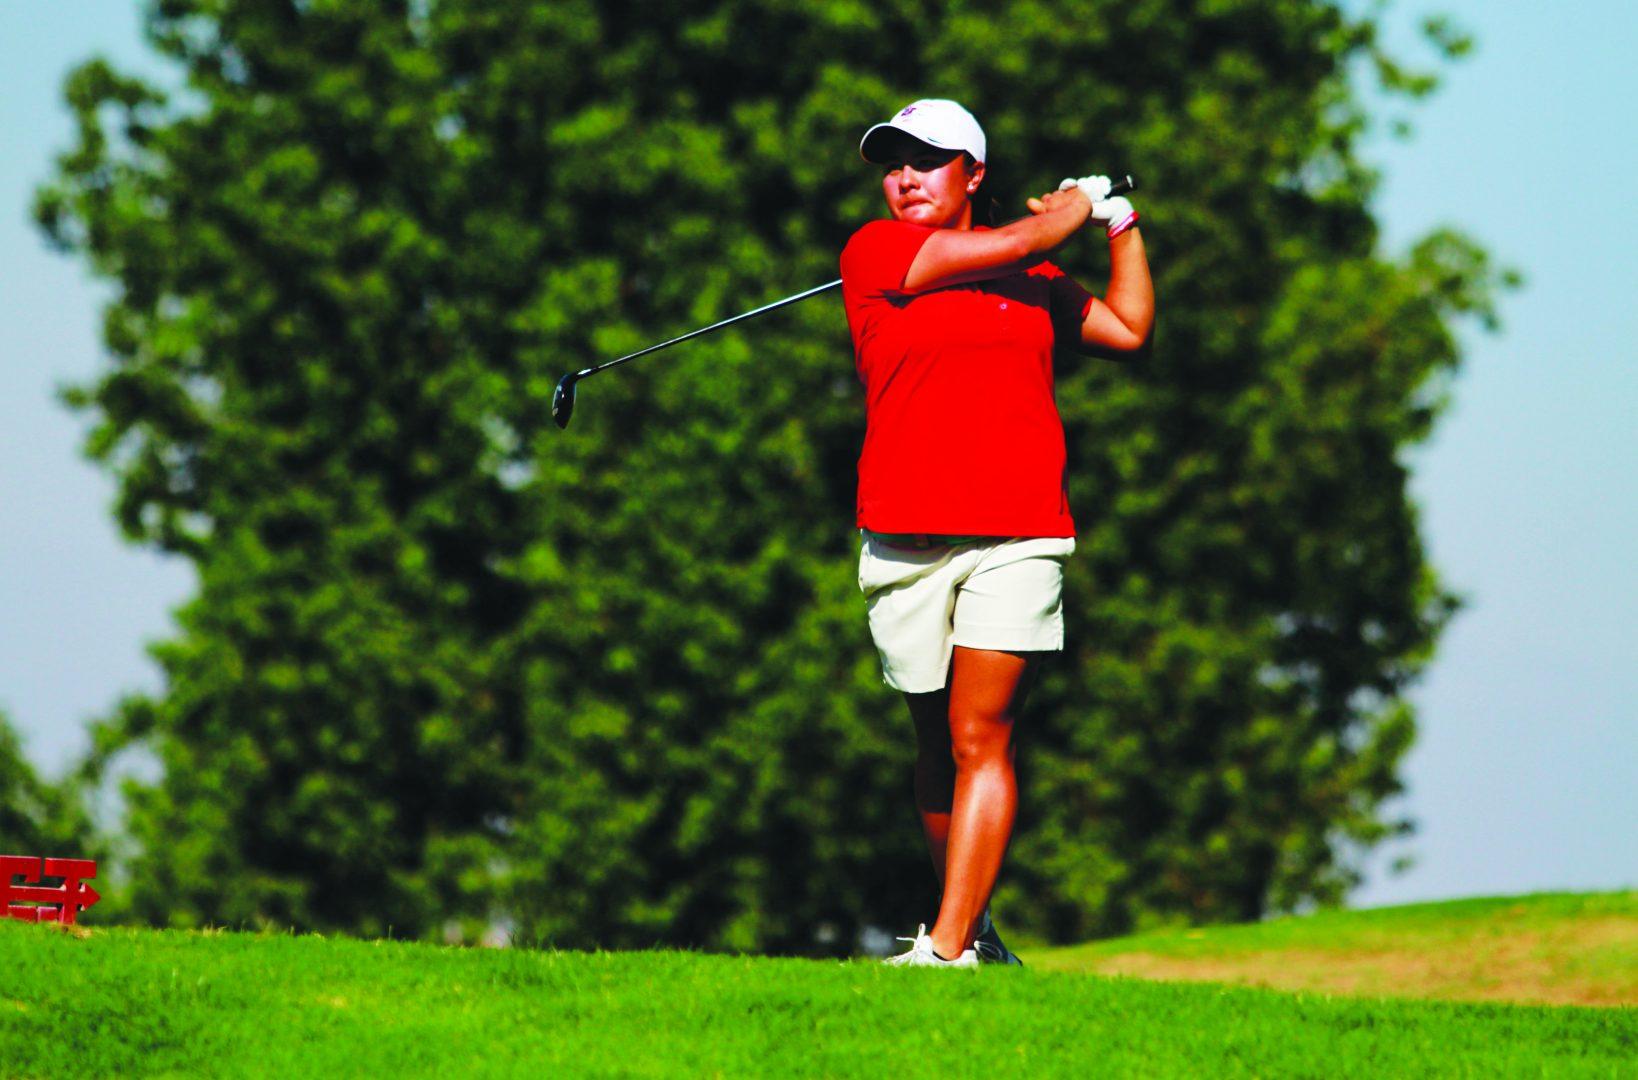 Fresno+State+senior+Madchen+Ly+completes+her+swing+during+the+Fresno+State+Classic+at+the+San+Joaquin+Country+Club+on+Monday.+The+%E2%80%98Dogs+finished+the+tournament+in+first+place.+Photo+by+Geoff+Thurner%2FFresno+State+Athletics